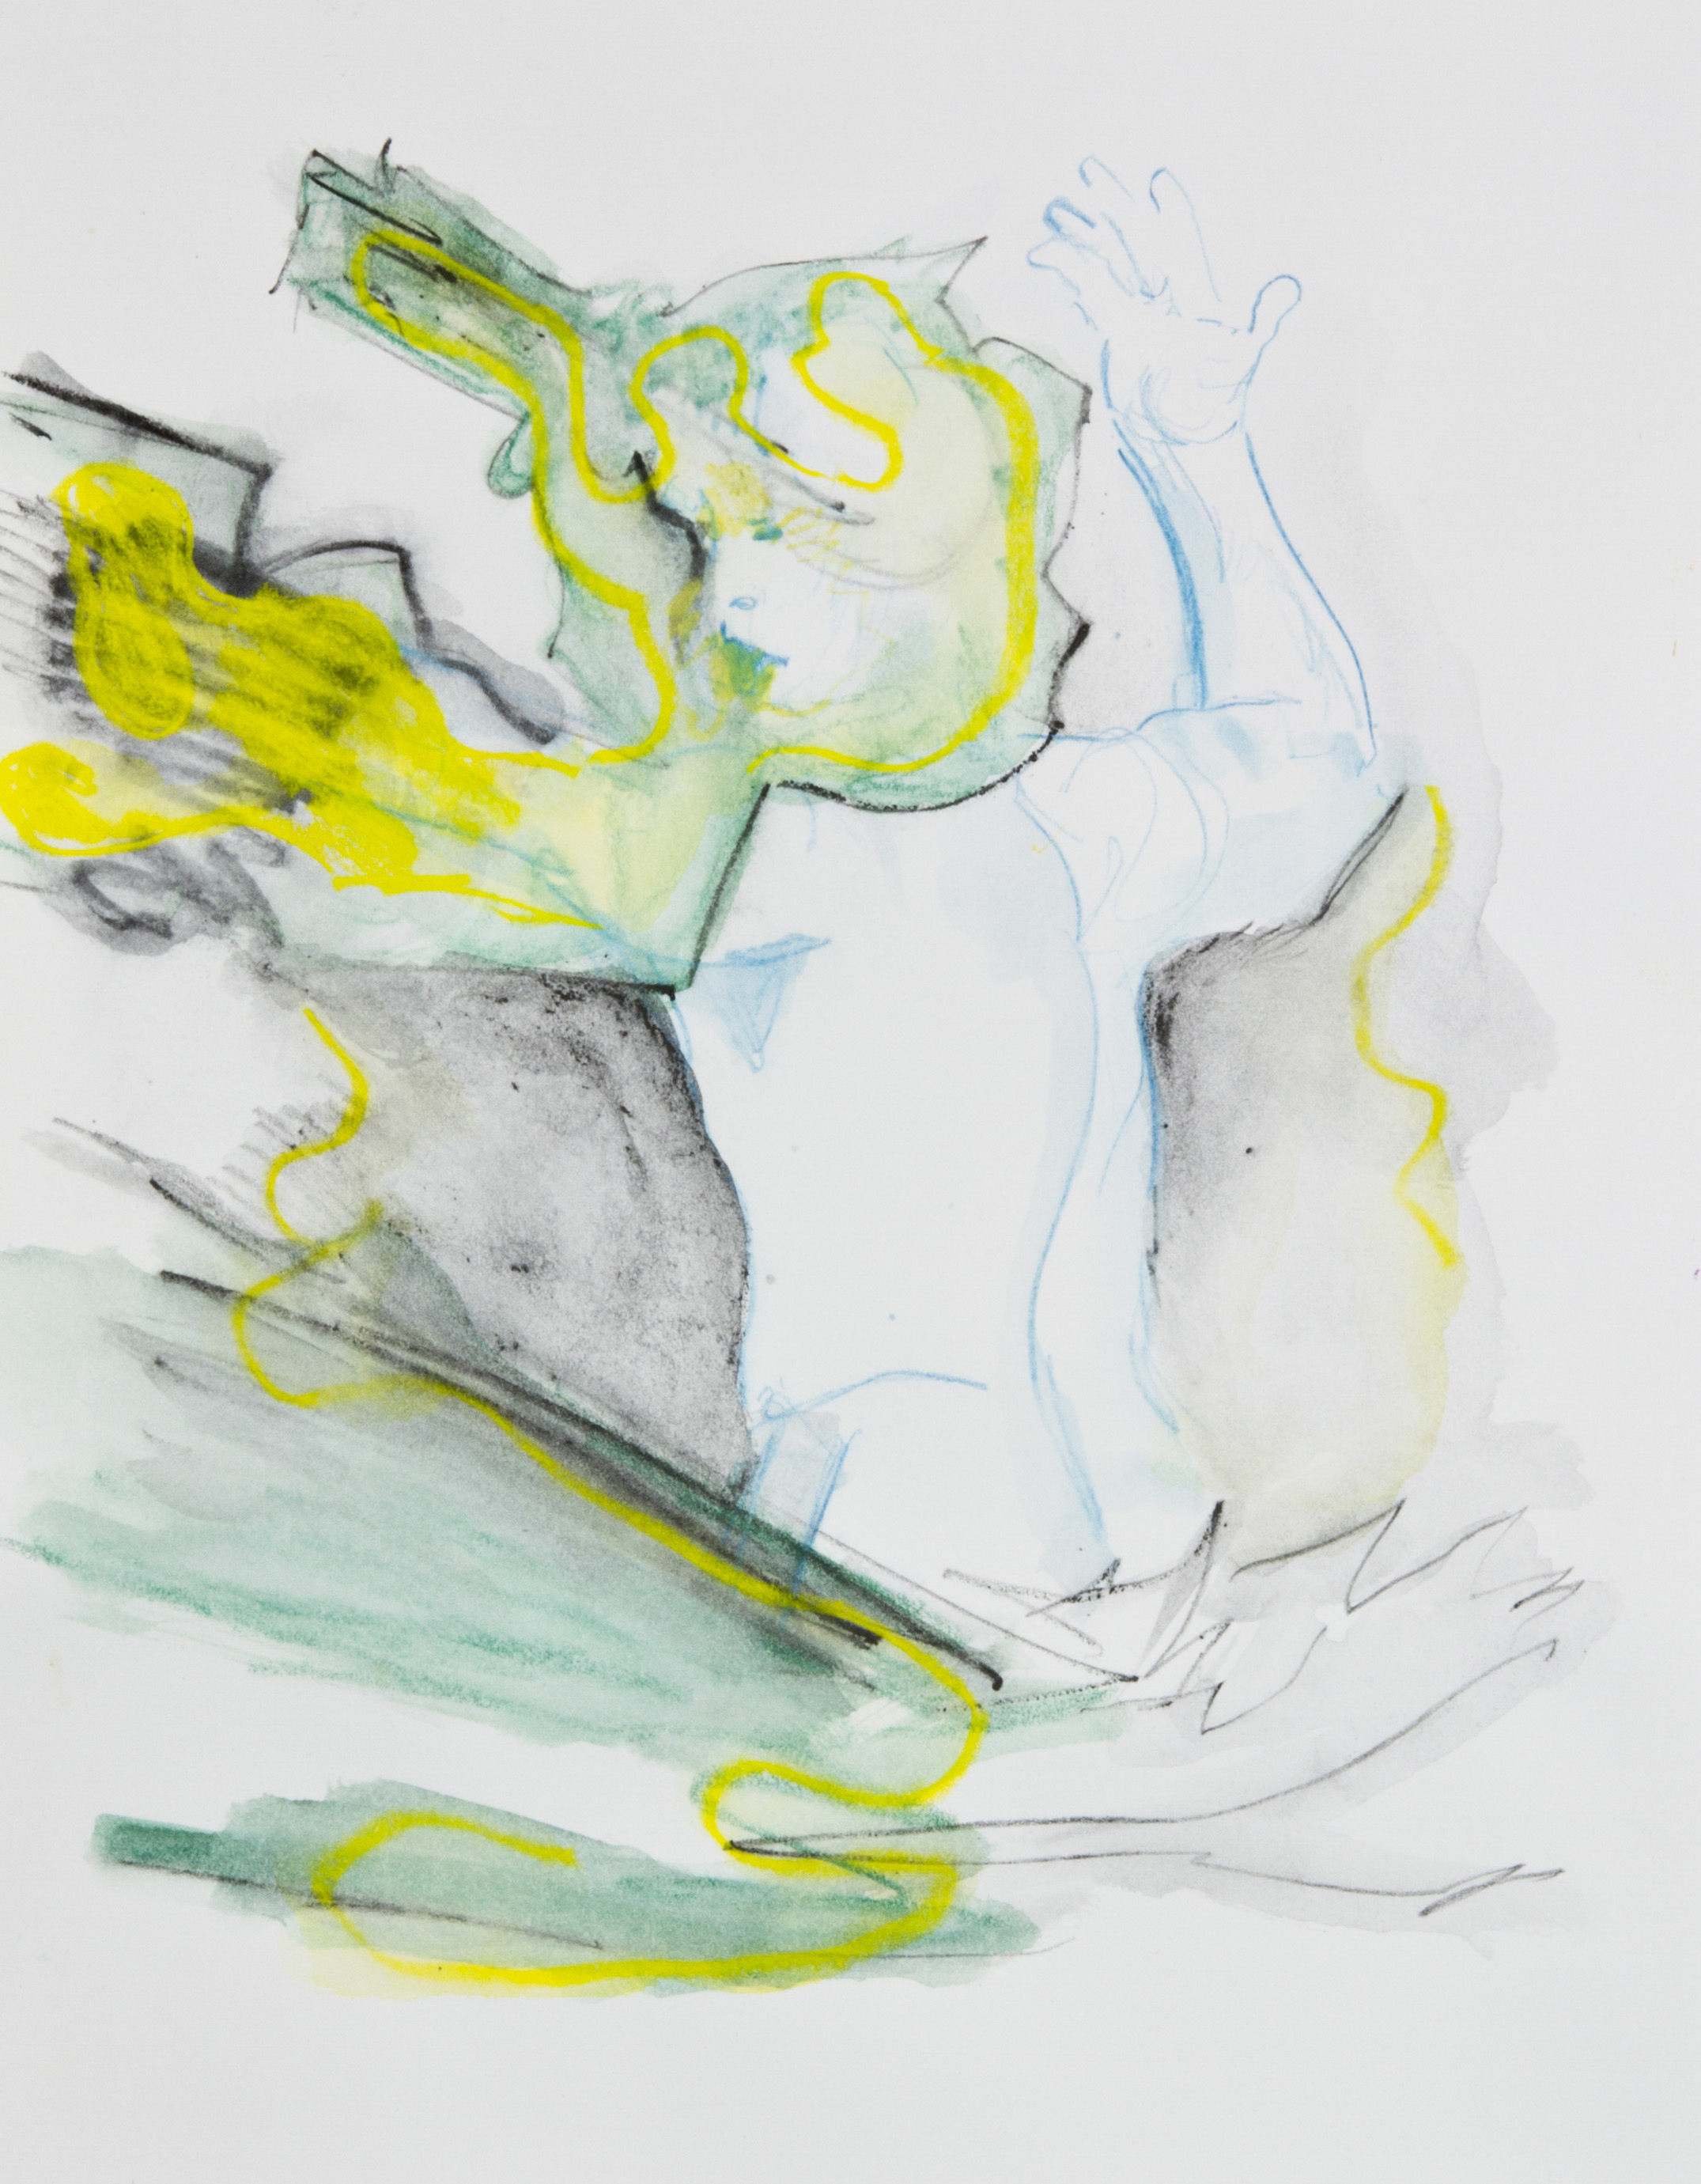 Thread Yield, 2013, graphite, crayon and watercolor pencil on paper, 11x14 inches